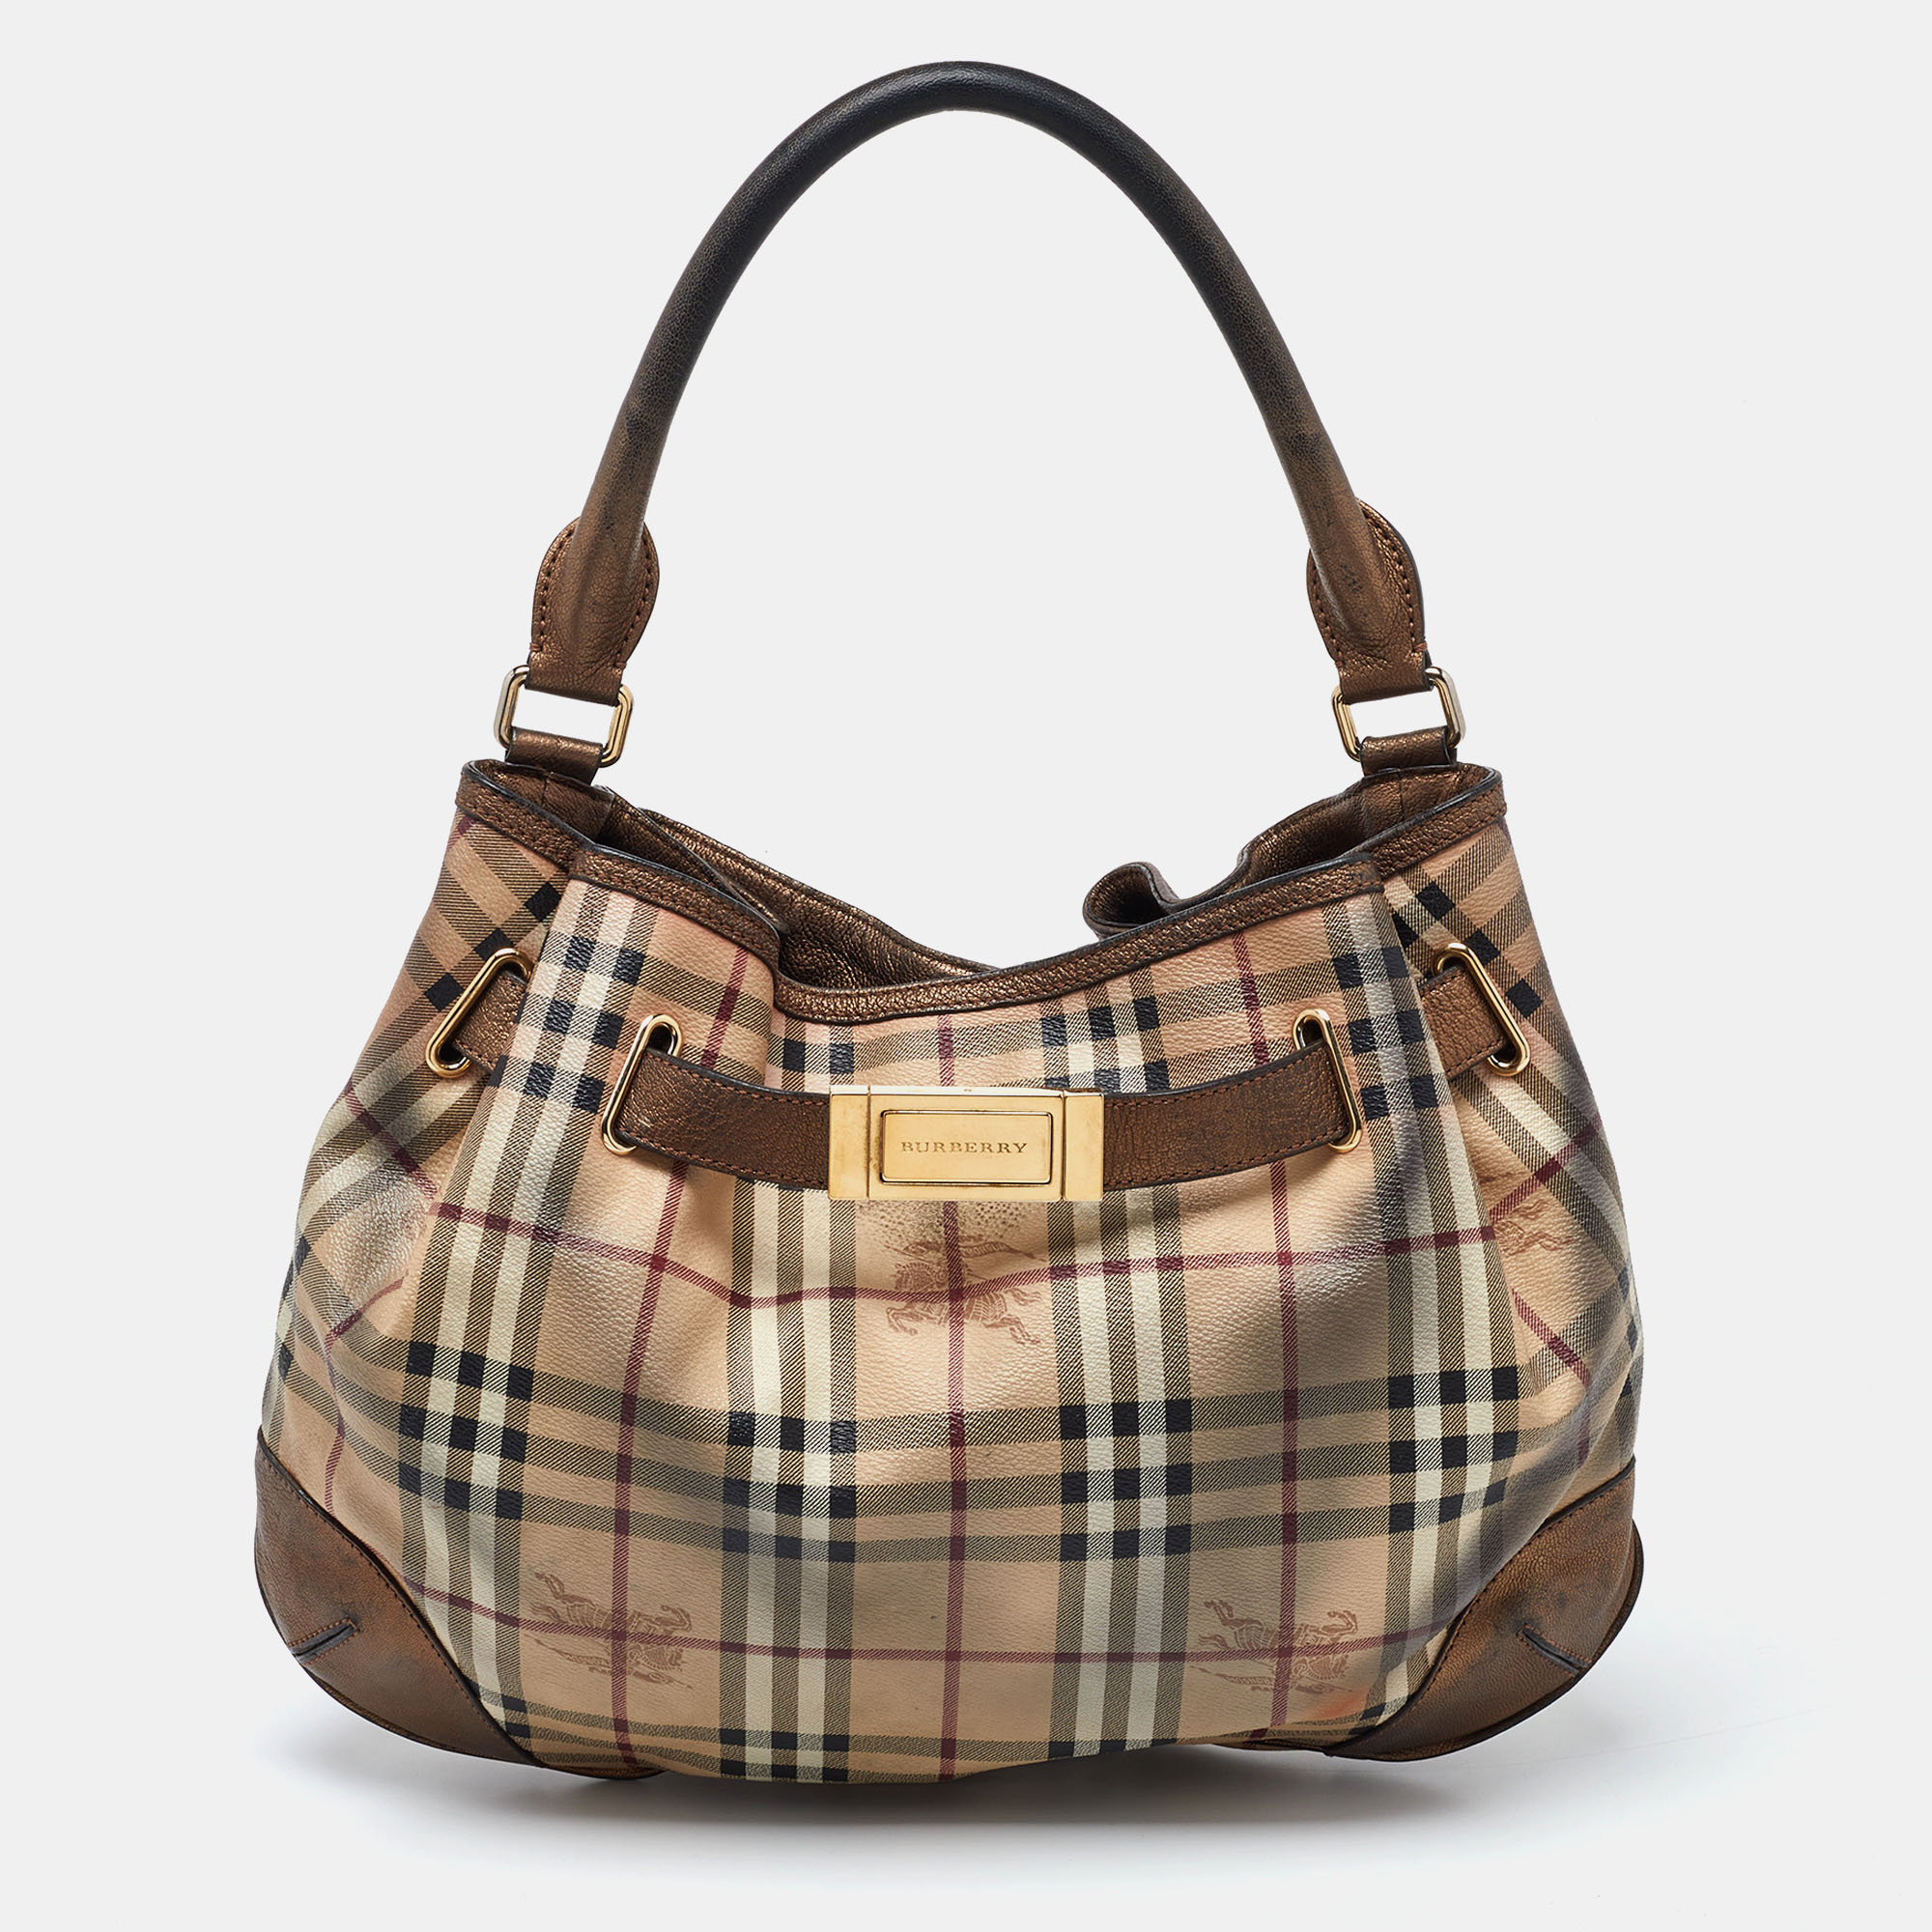 This beautifully stitched Willenmore hobo bag is by Burberry and has been crafted from signature Haymarket Check PVC and leather. With a spacious fabric lined interior it will house more than your essentials. Boasting a seamless finish this beige hued hobo offers style and utmost practicality.